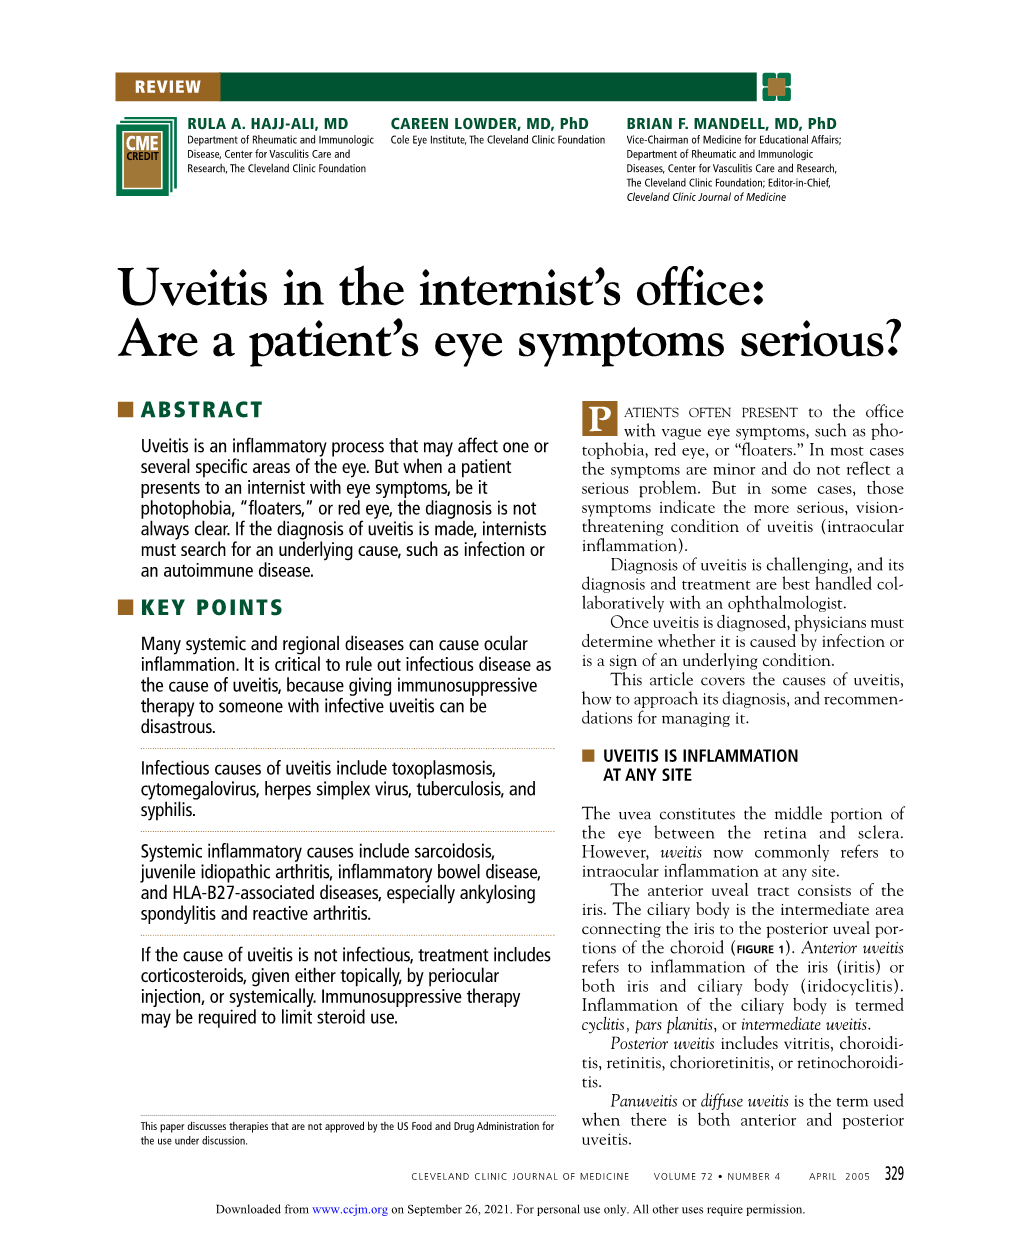 Uveitis in the Internist's Office: Are a Patient's Eye Symptoms Serious?